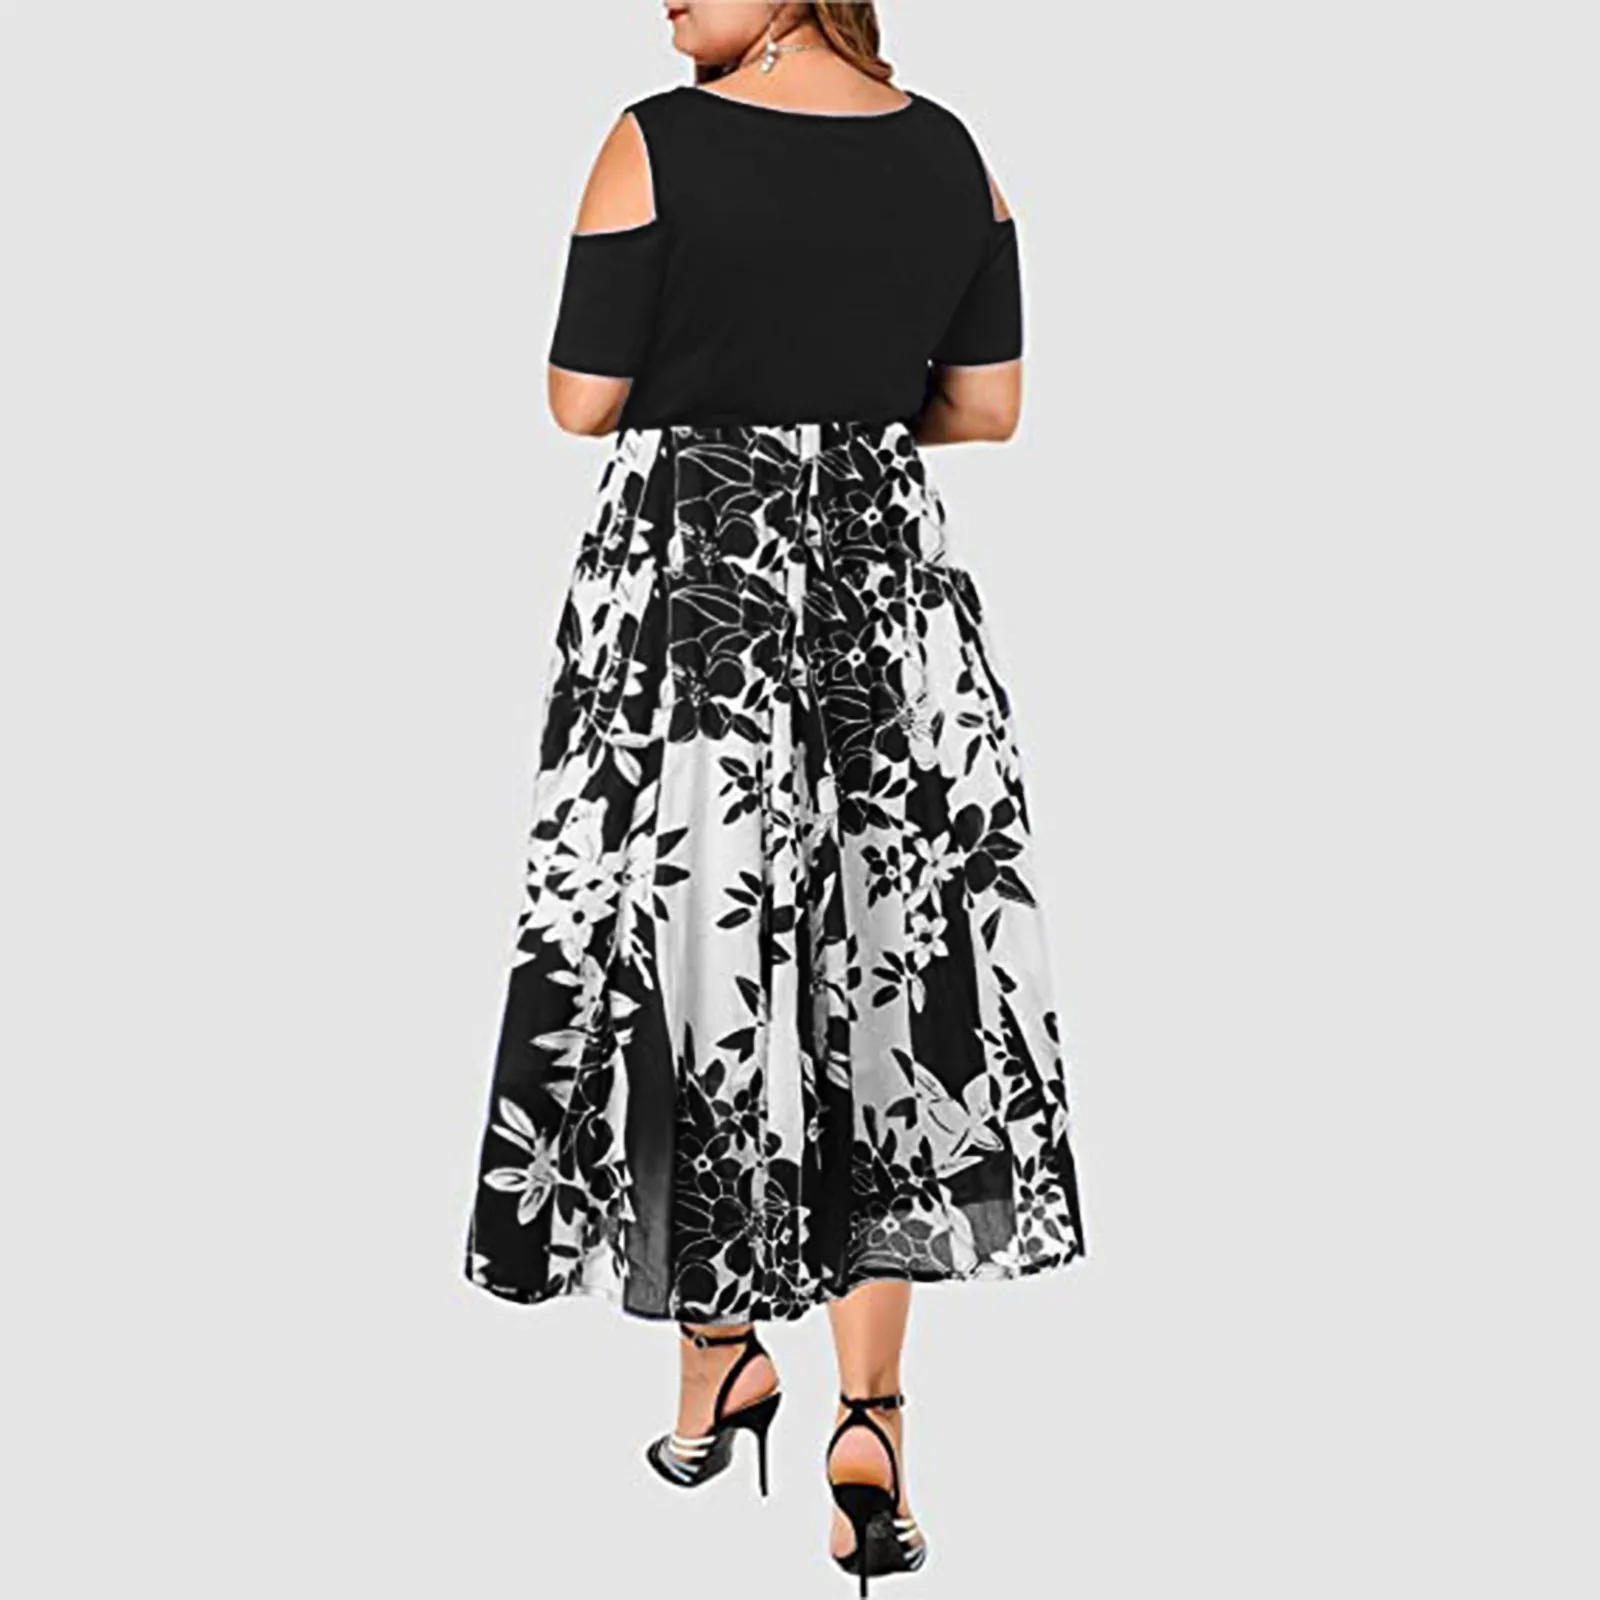 Leaf print plus size dresses for women casual o neck strapless short sleeve summer bohemian floral